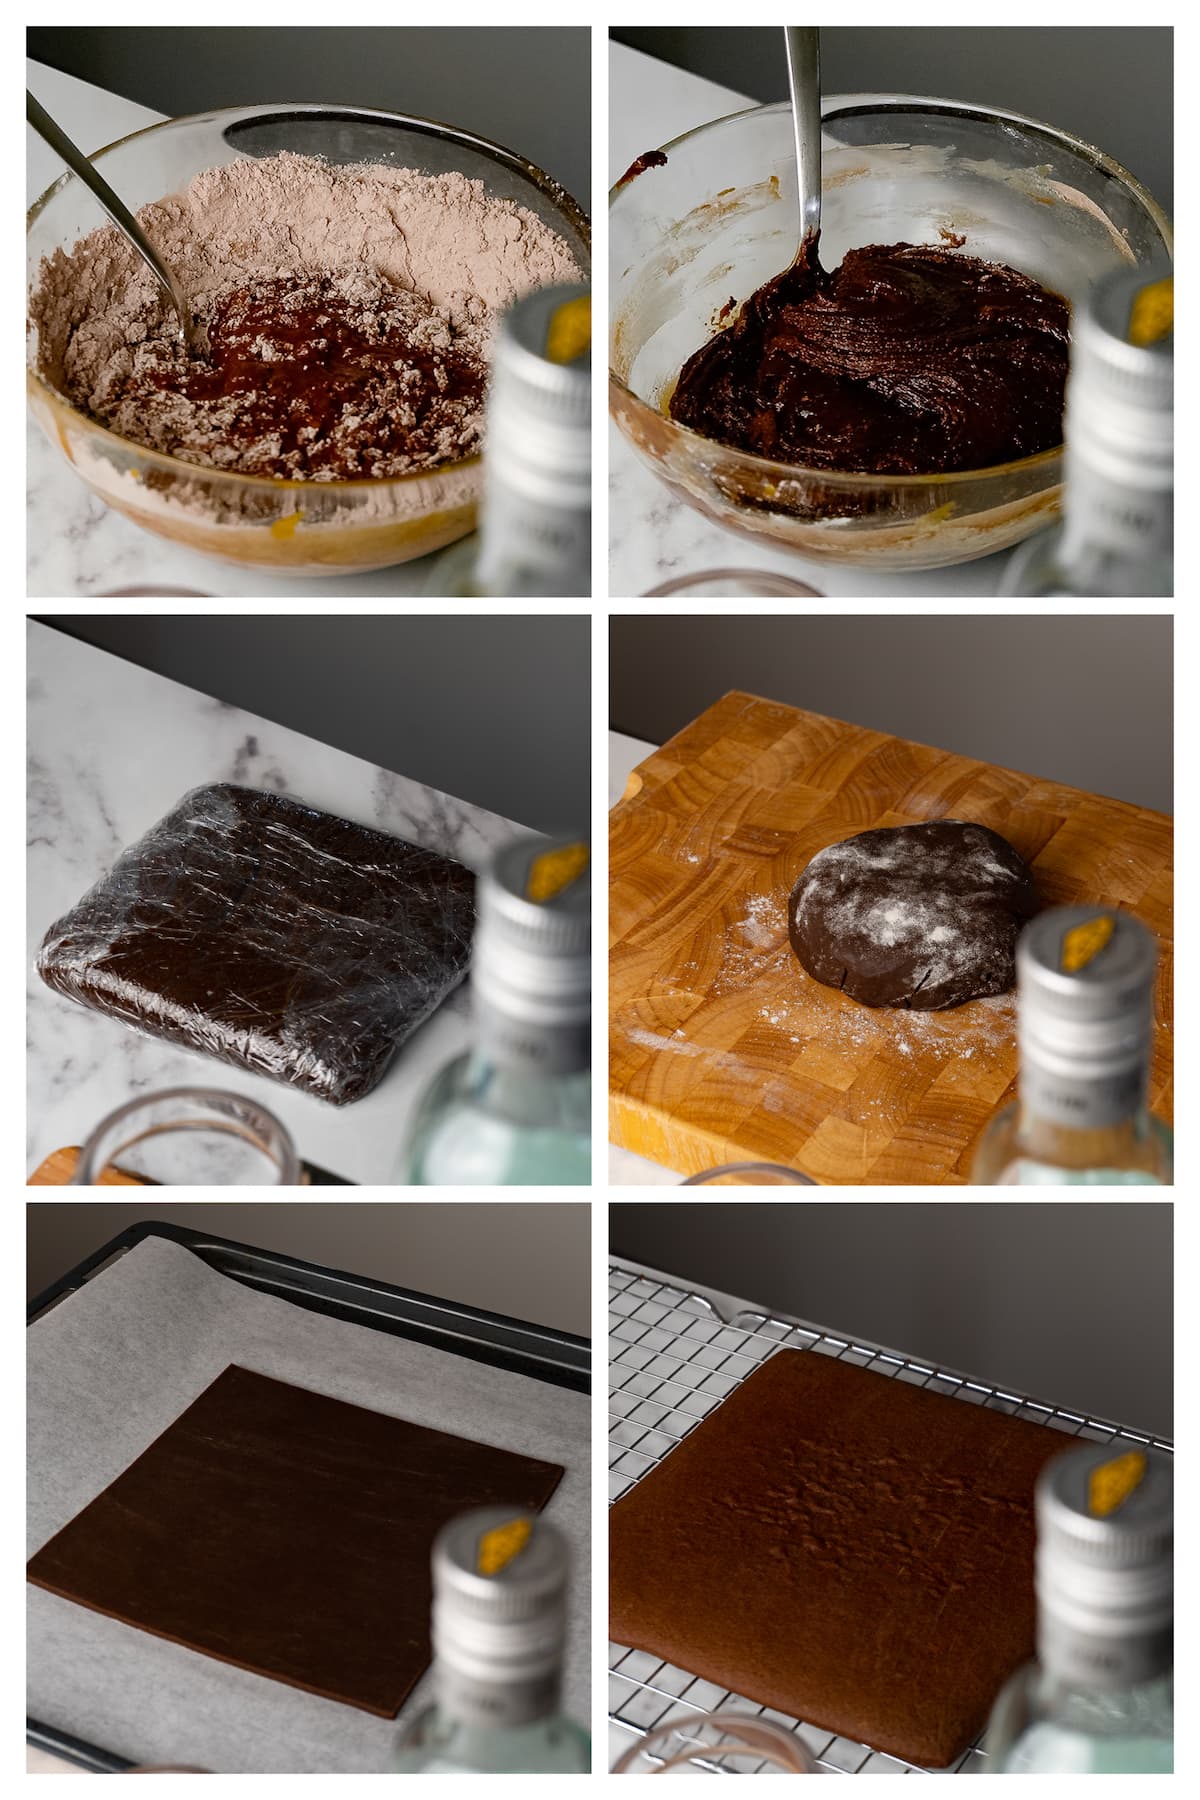 The collage image shows four steps to bake cookies for ice cream sandwiches.